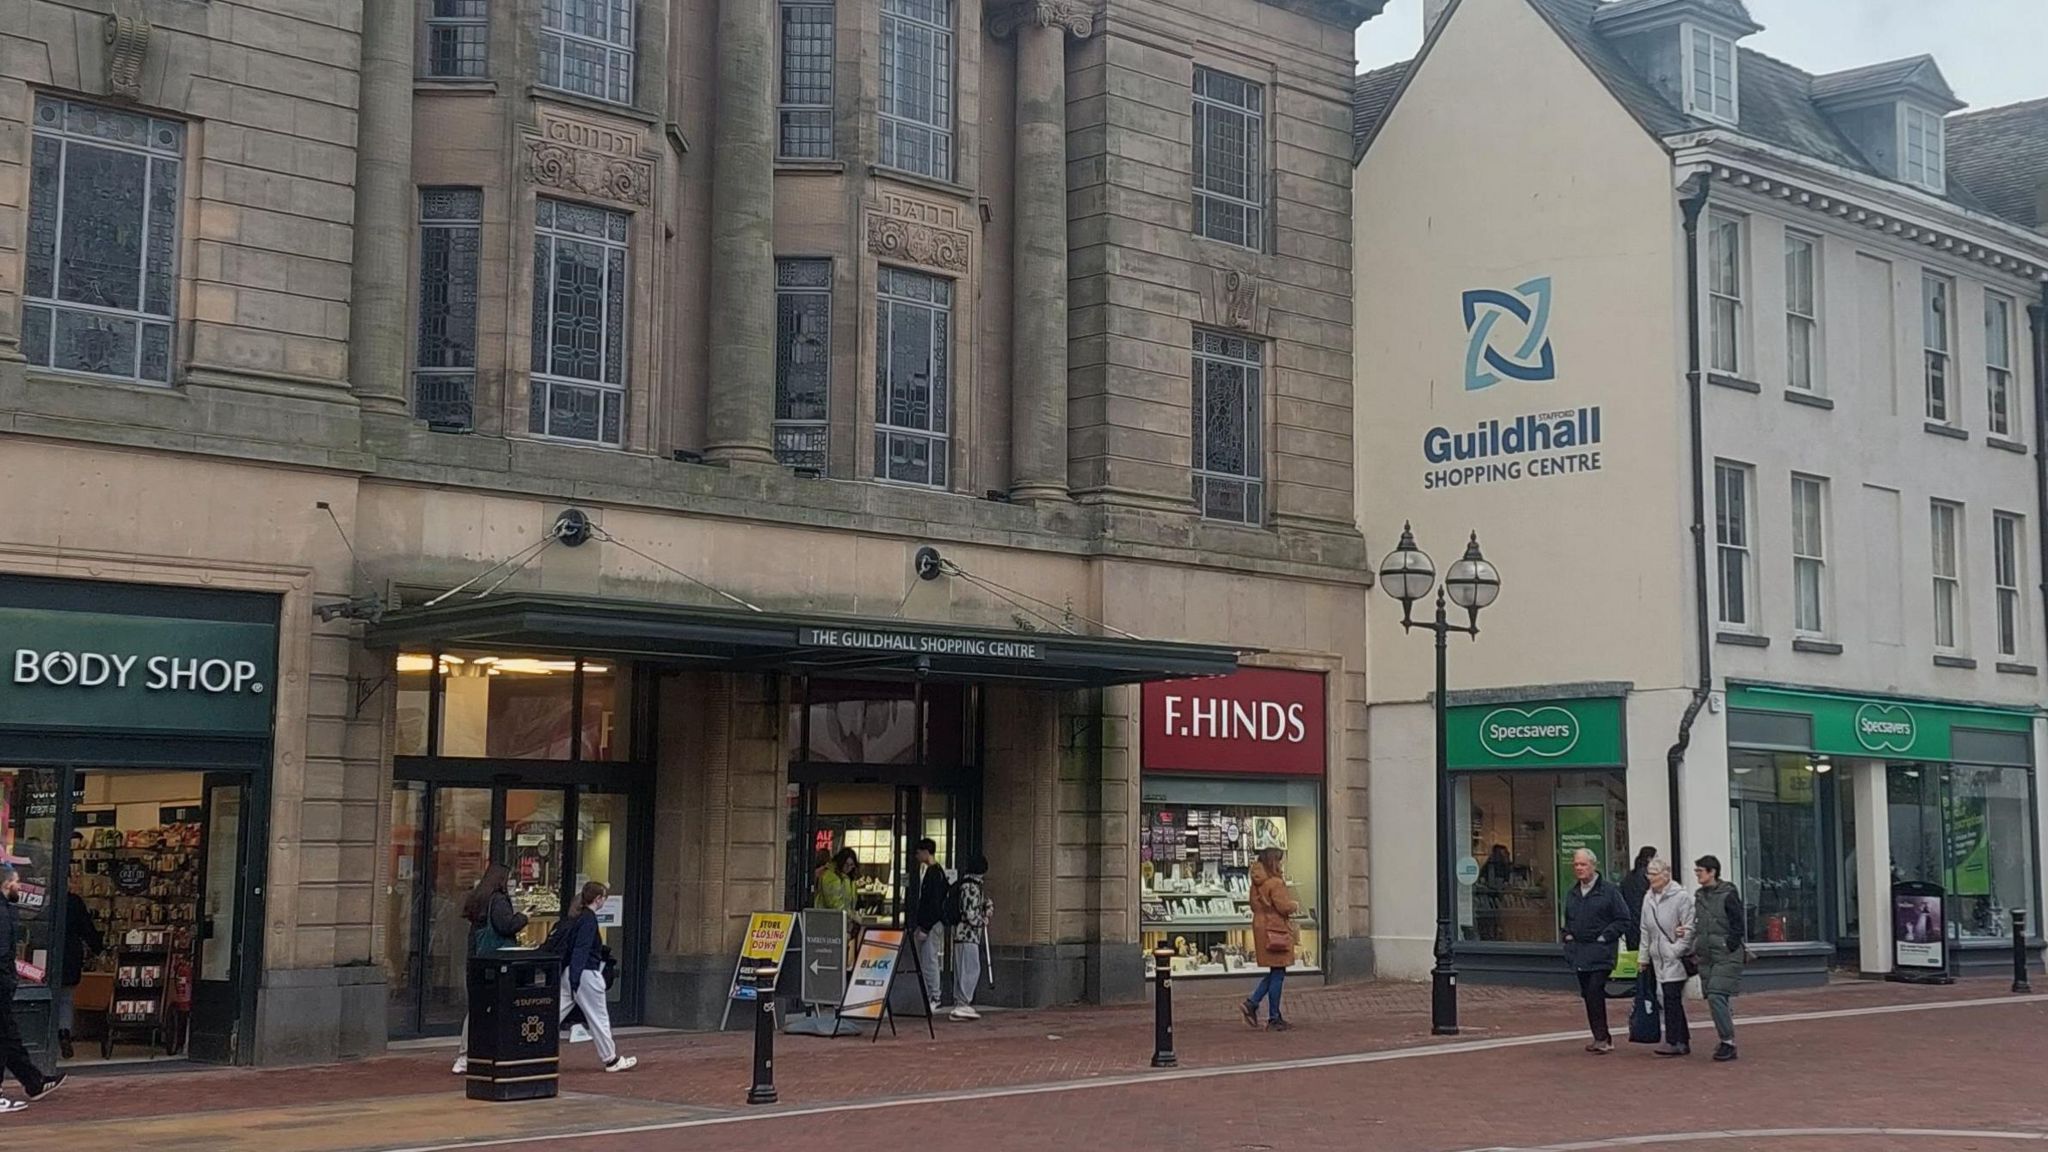 Guildhall Shopping Centre, high street entrance.Photocredit: Stafford Borough Council